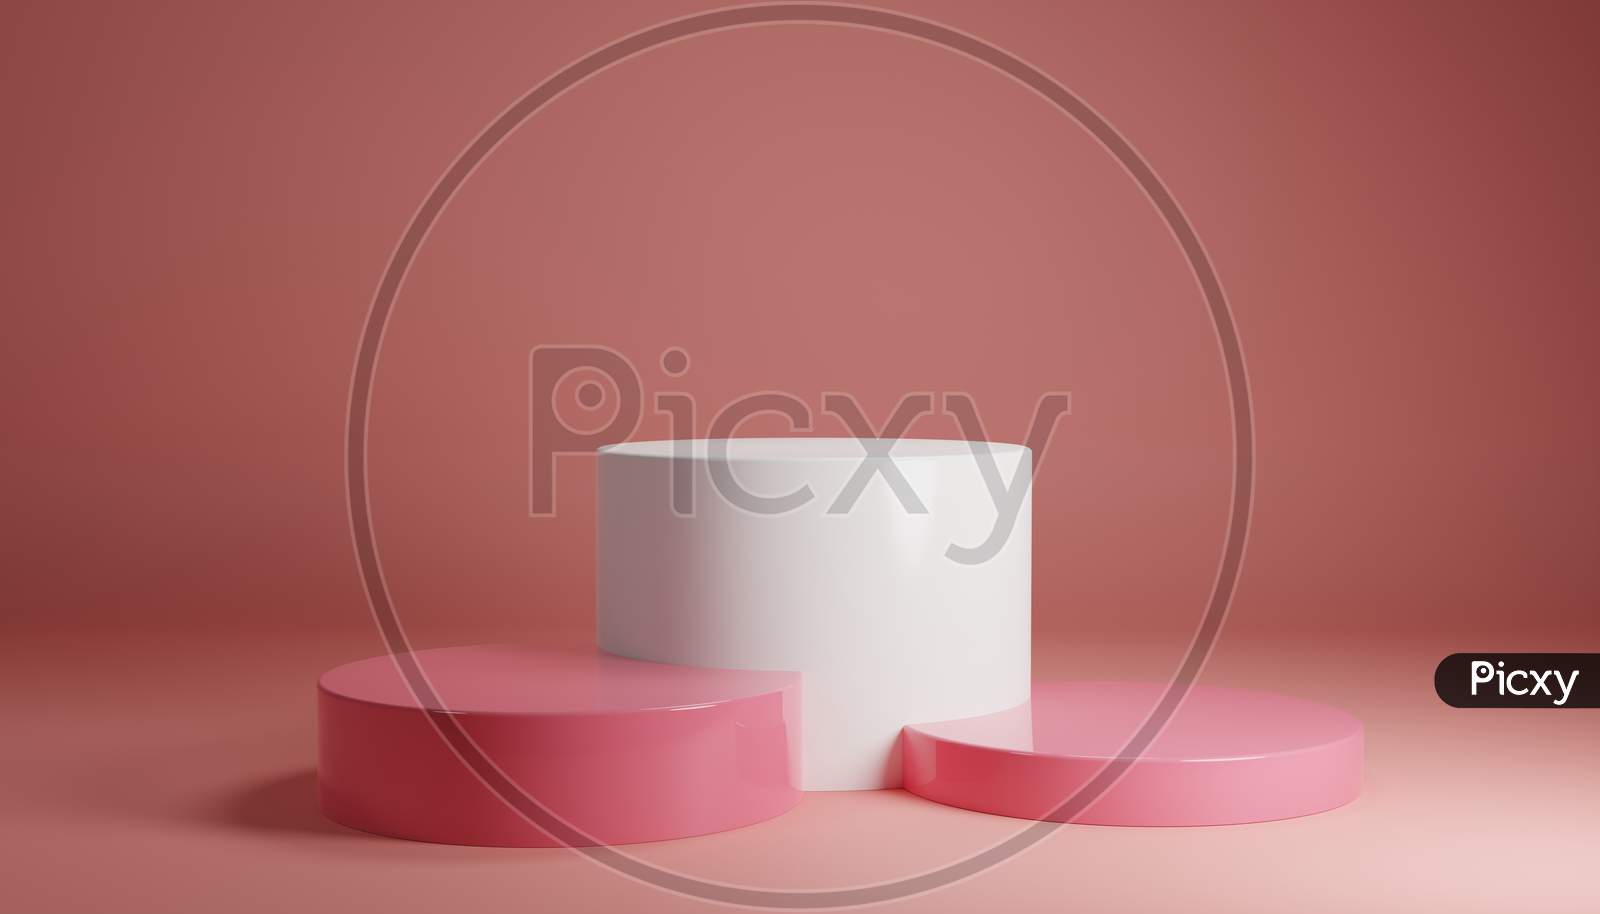 White Pink Pastel Product Stand On Background. Abstract Minimal Geometry Concept. Studio Podium Platform Theme. Exhibition Business Marketing Presentation Stage. 3D Illustration Render Graphic Design